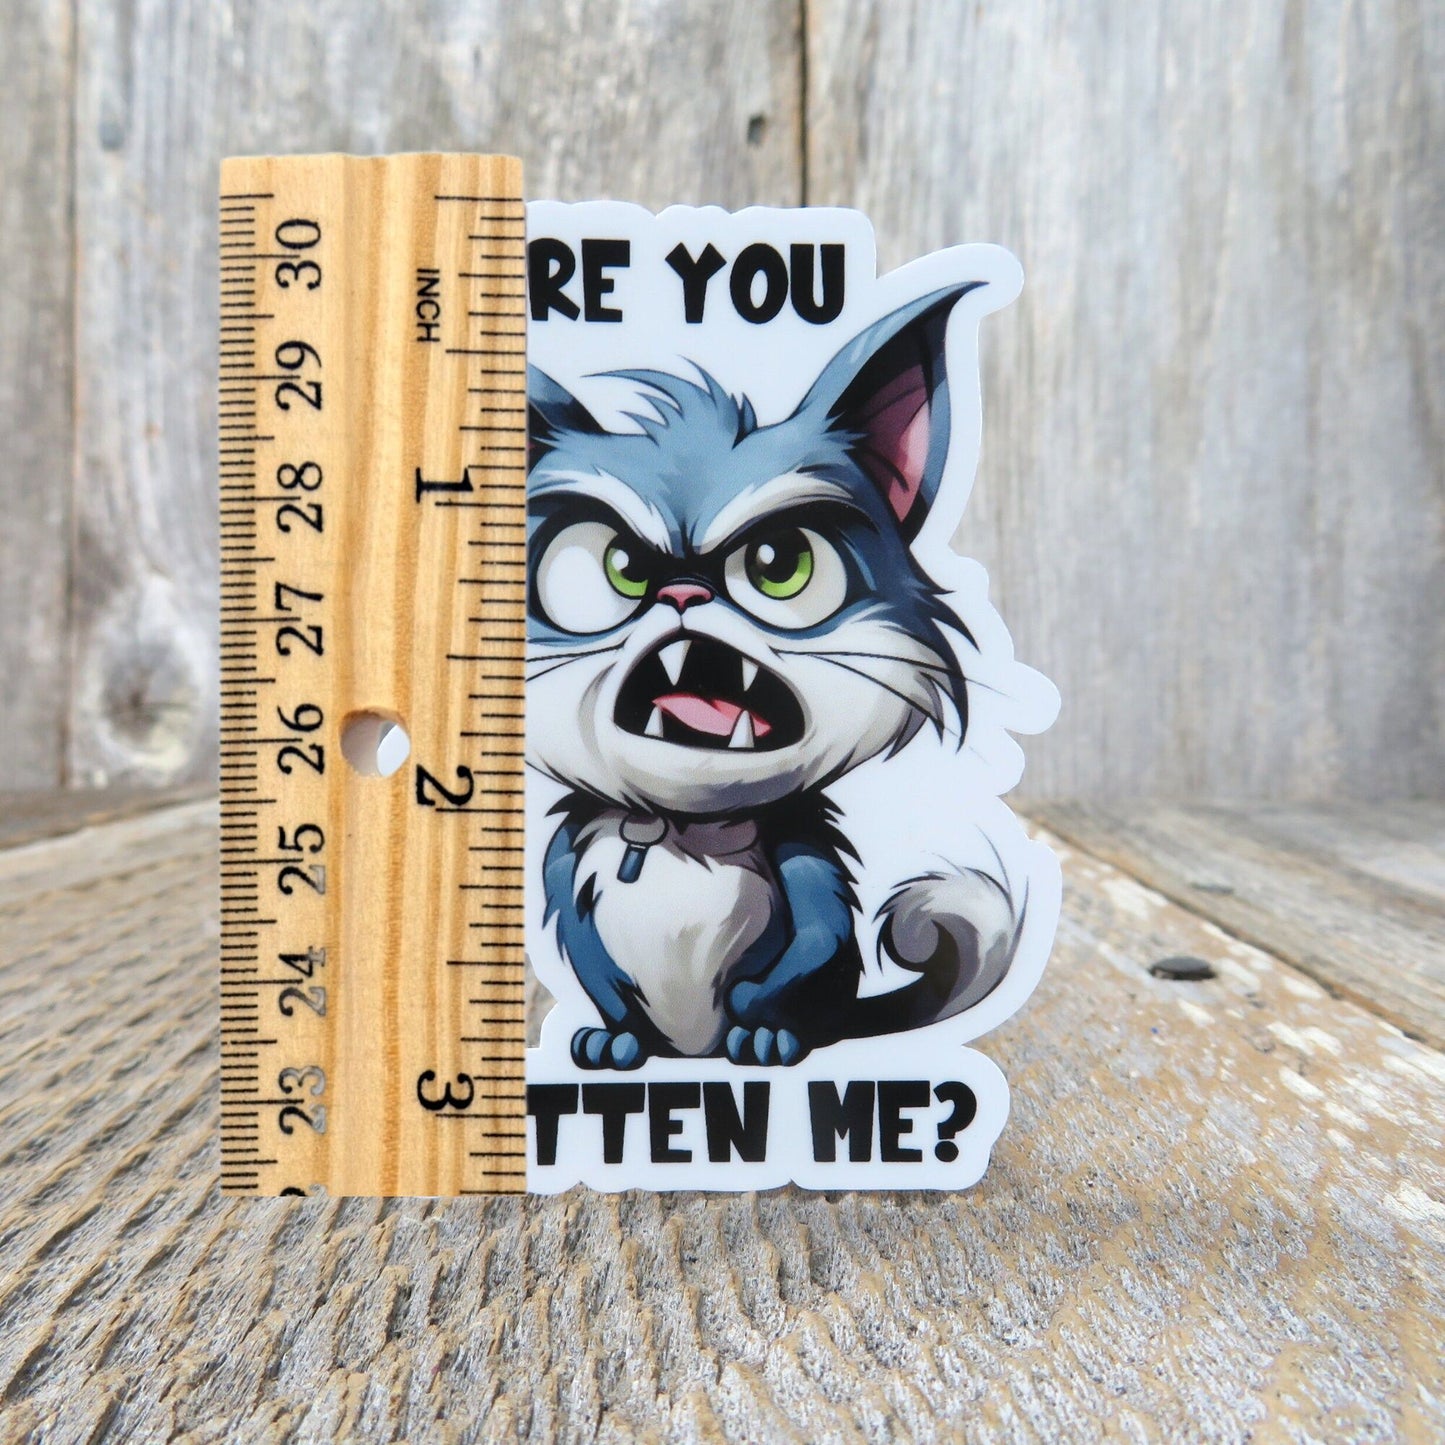 Are You Kitten Me Grumpy Cat Sticker Kidding Me Full Color Social Funny Sarcastic